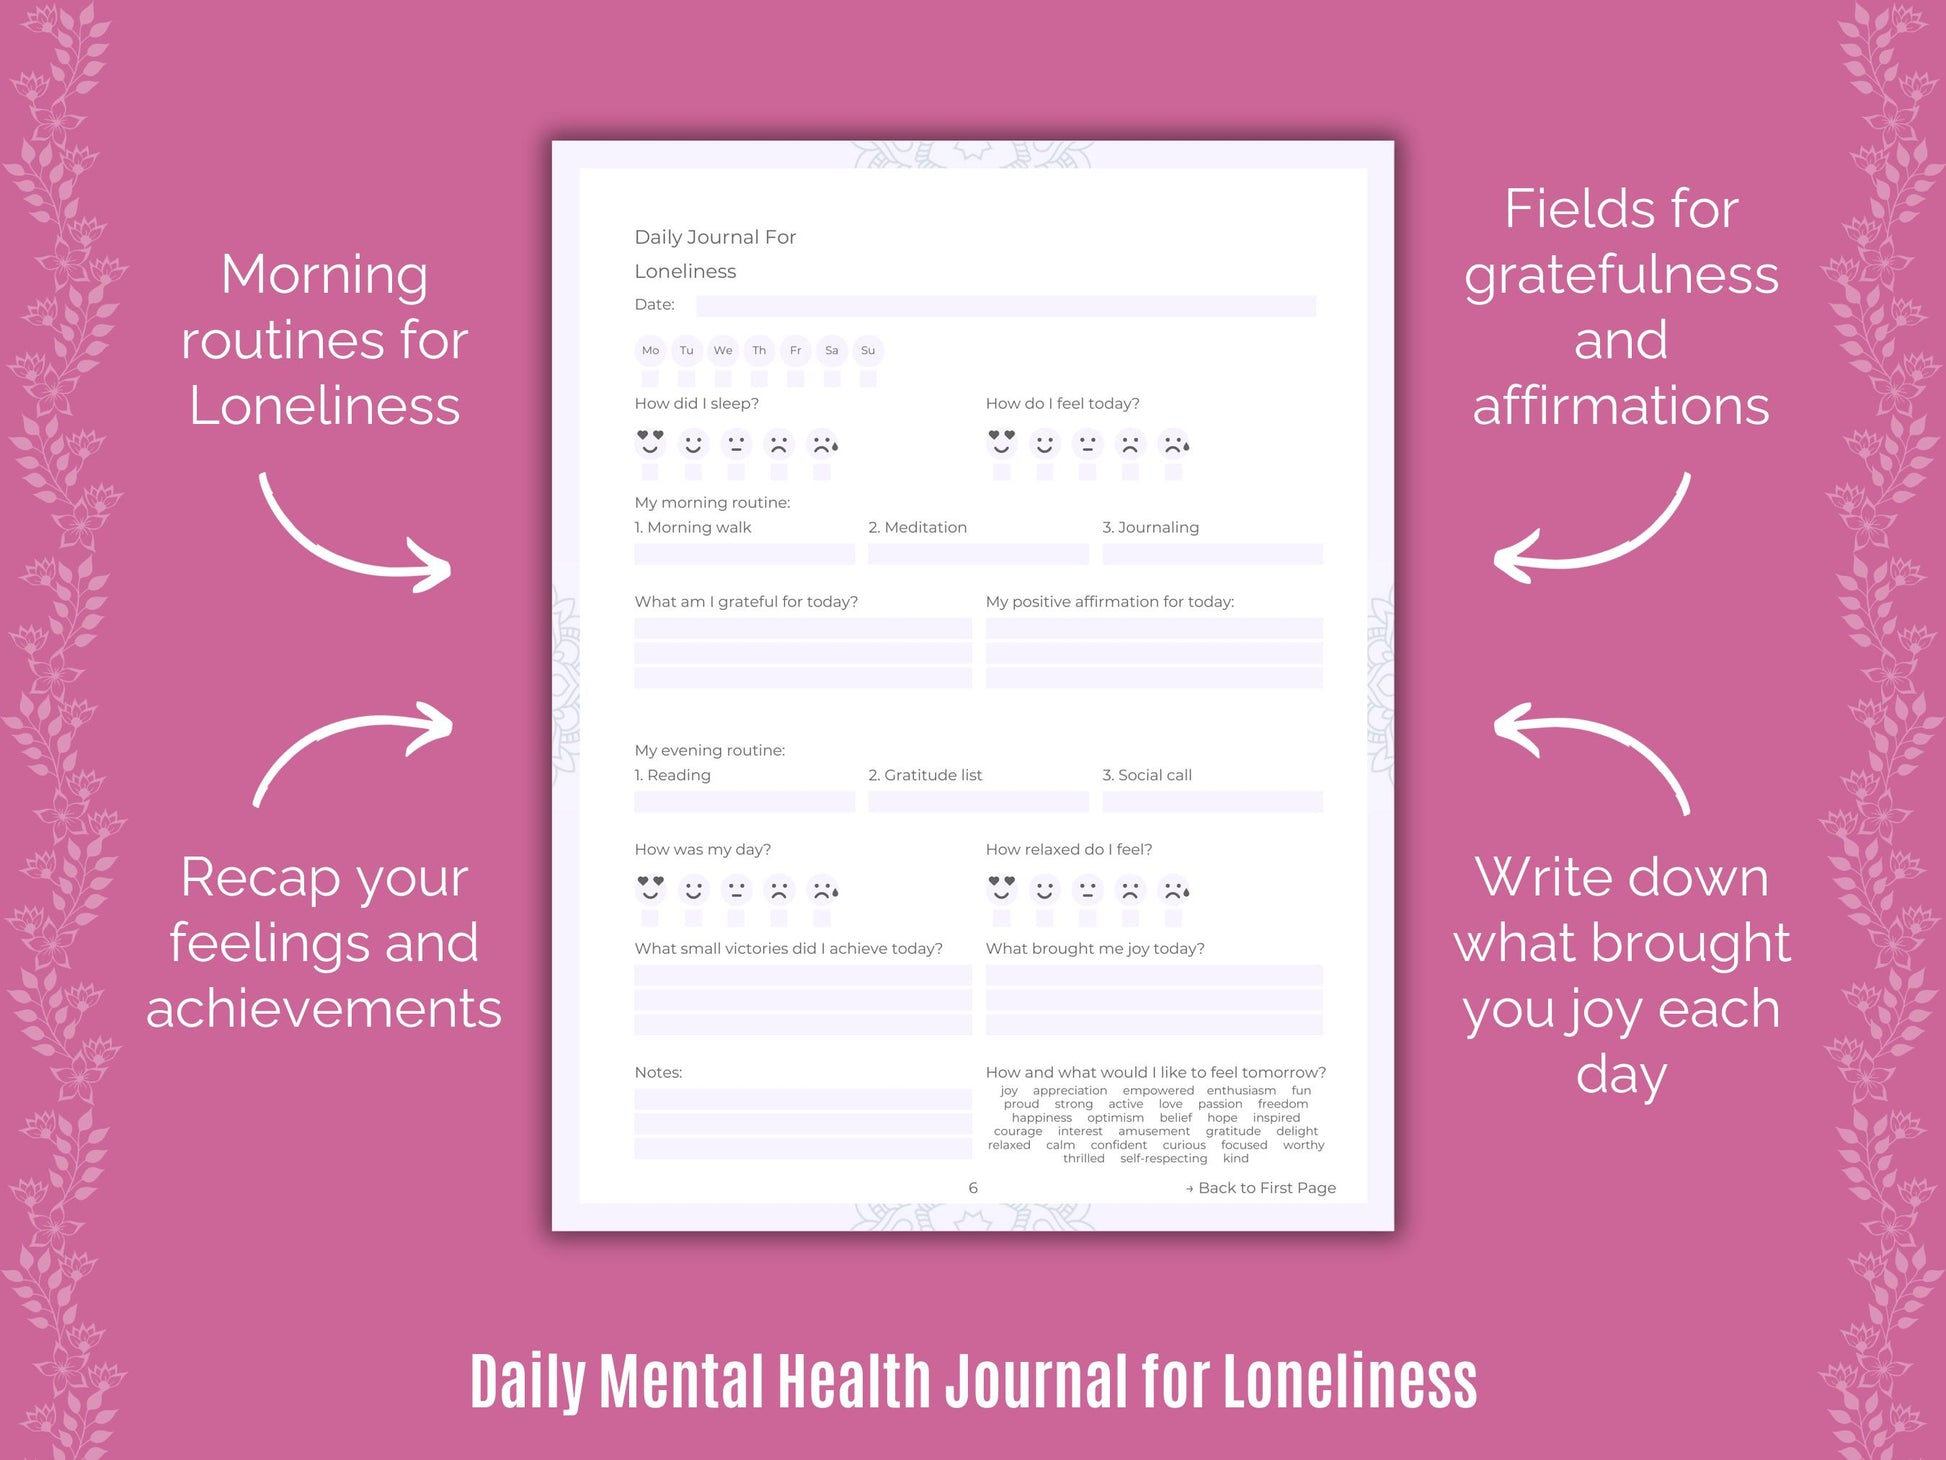 Goal Setting, Loneliness Workbooks, Journaling, Counseling, Loneliness Journals, Loneliness Templates, Cheat Sheet, Loneliness Tools, Loneliness Mental Health, Loneliness Notes, Loneliness Therapy, Loneliness Planners, Loneliness Resources